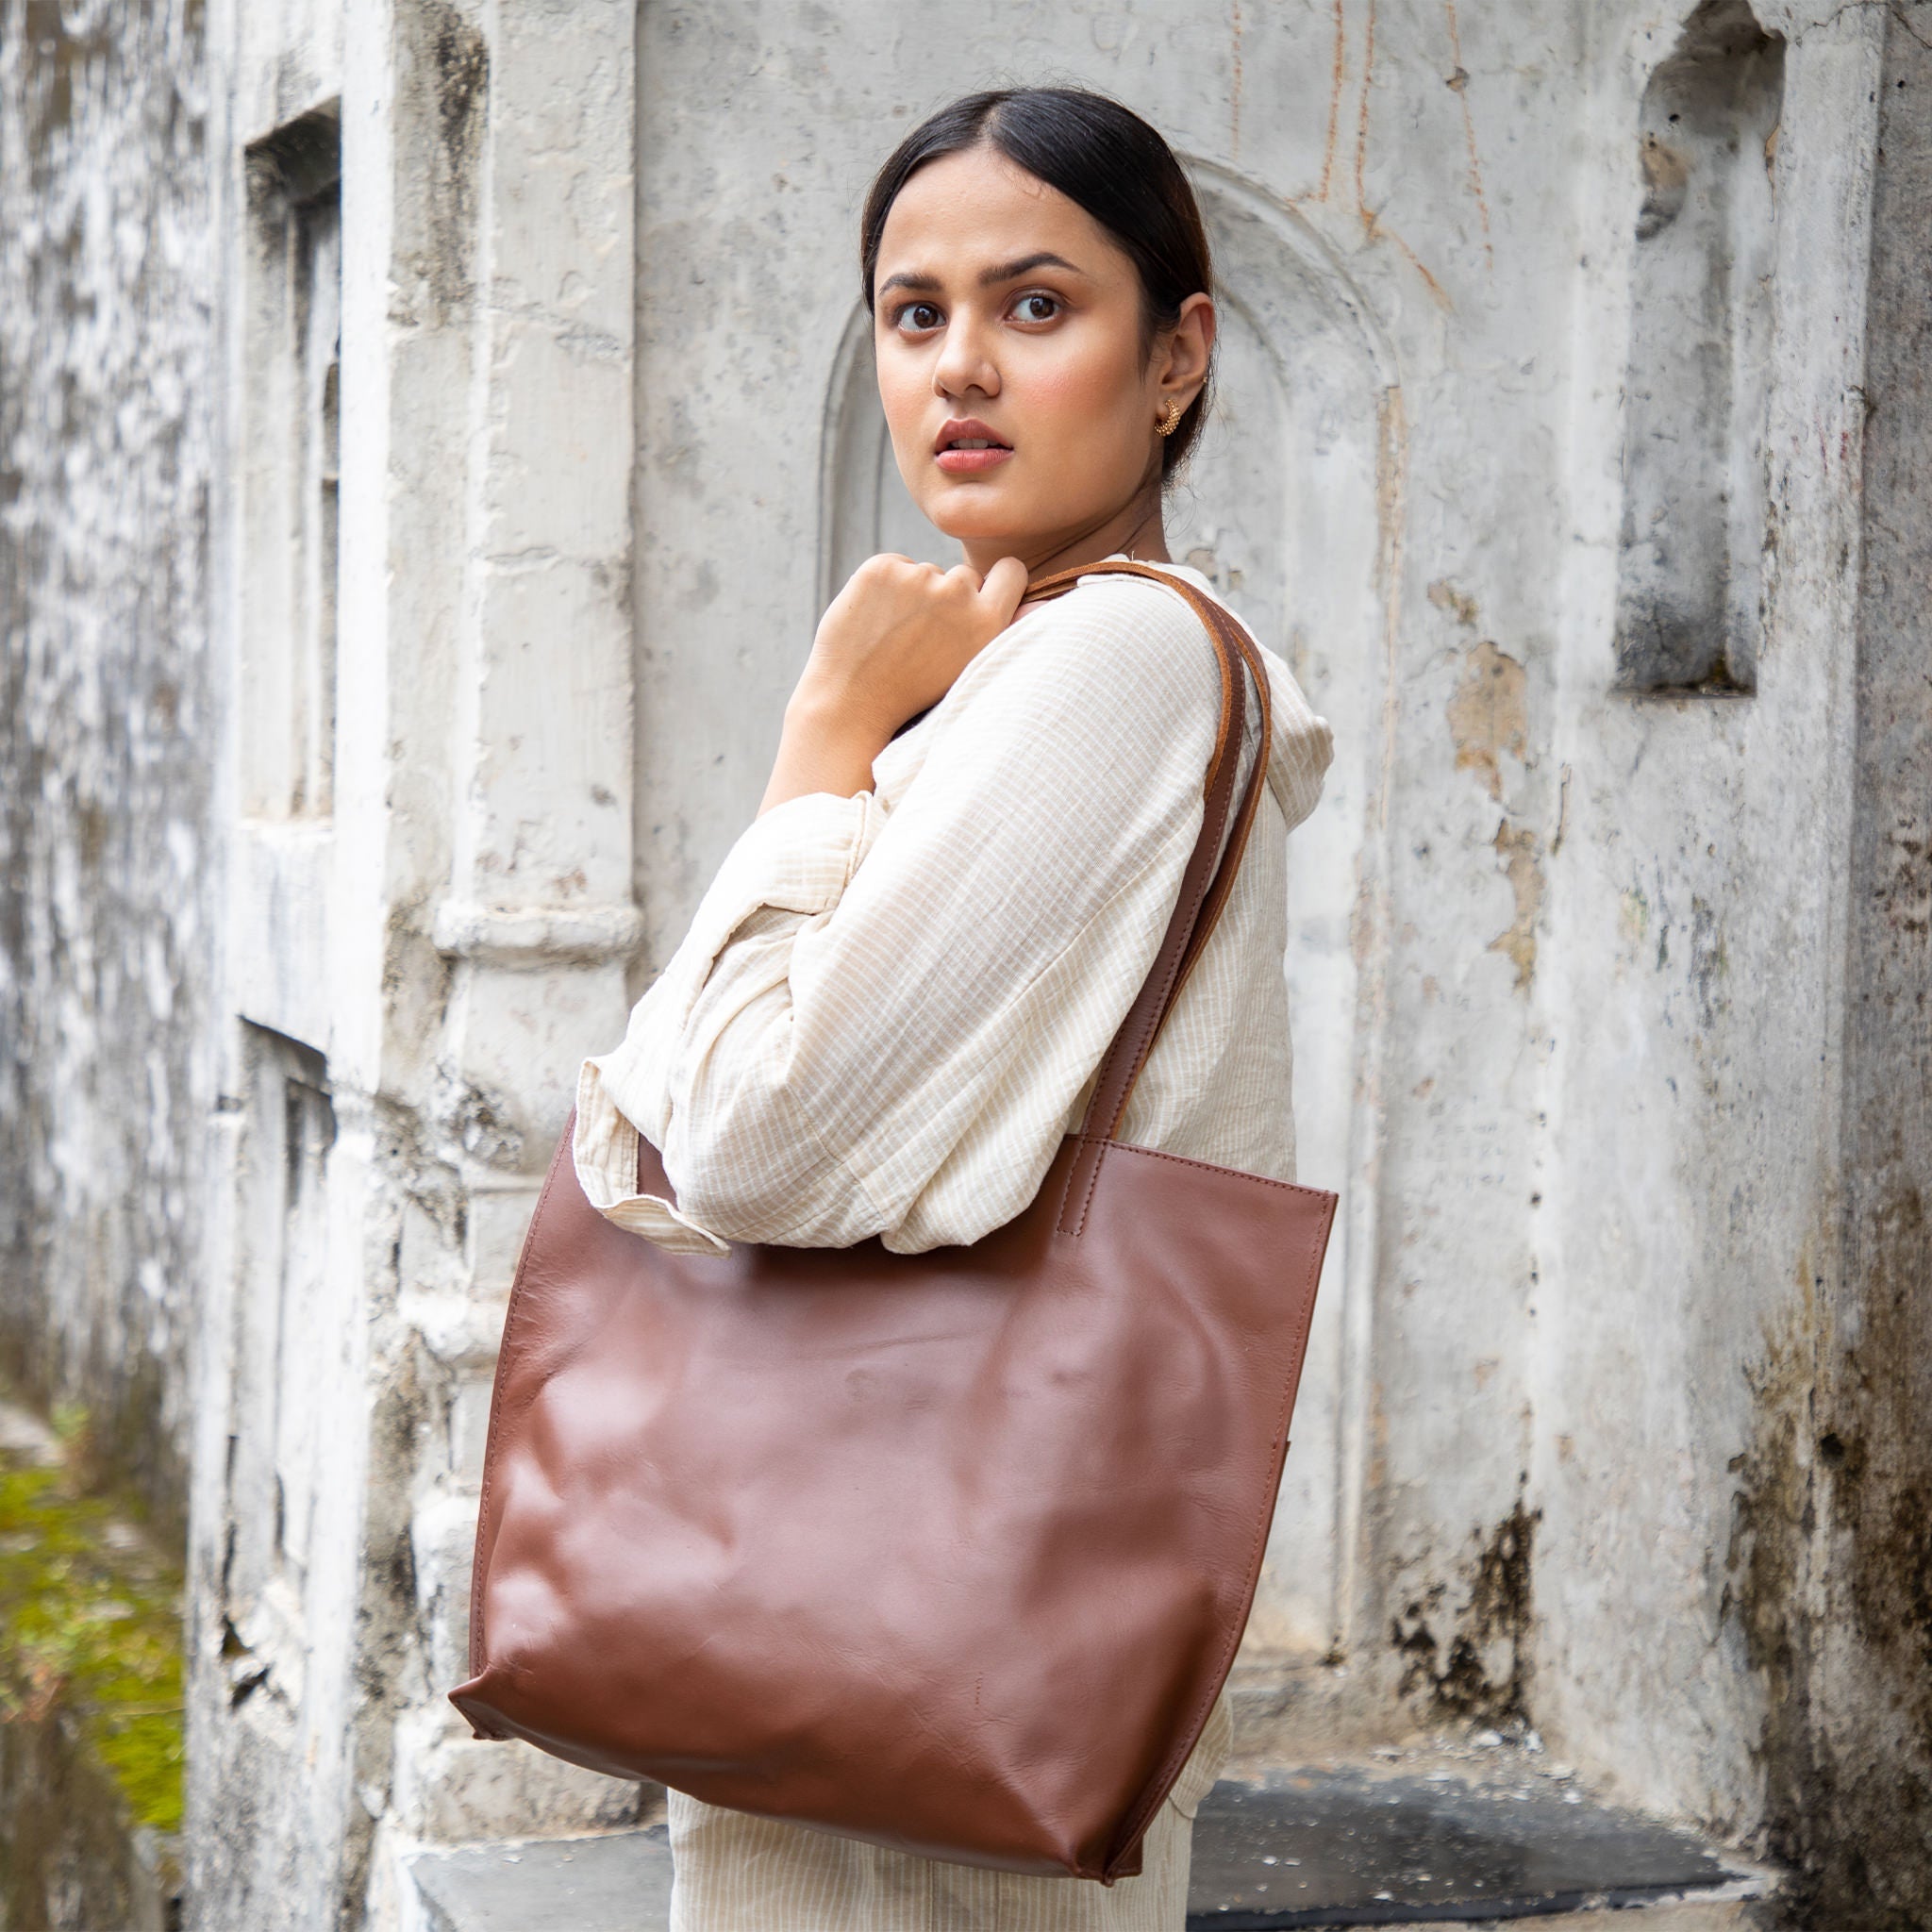 Everyday Leather Tote - Chocolate Brown